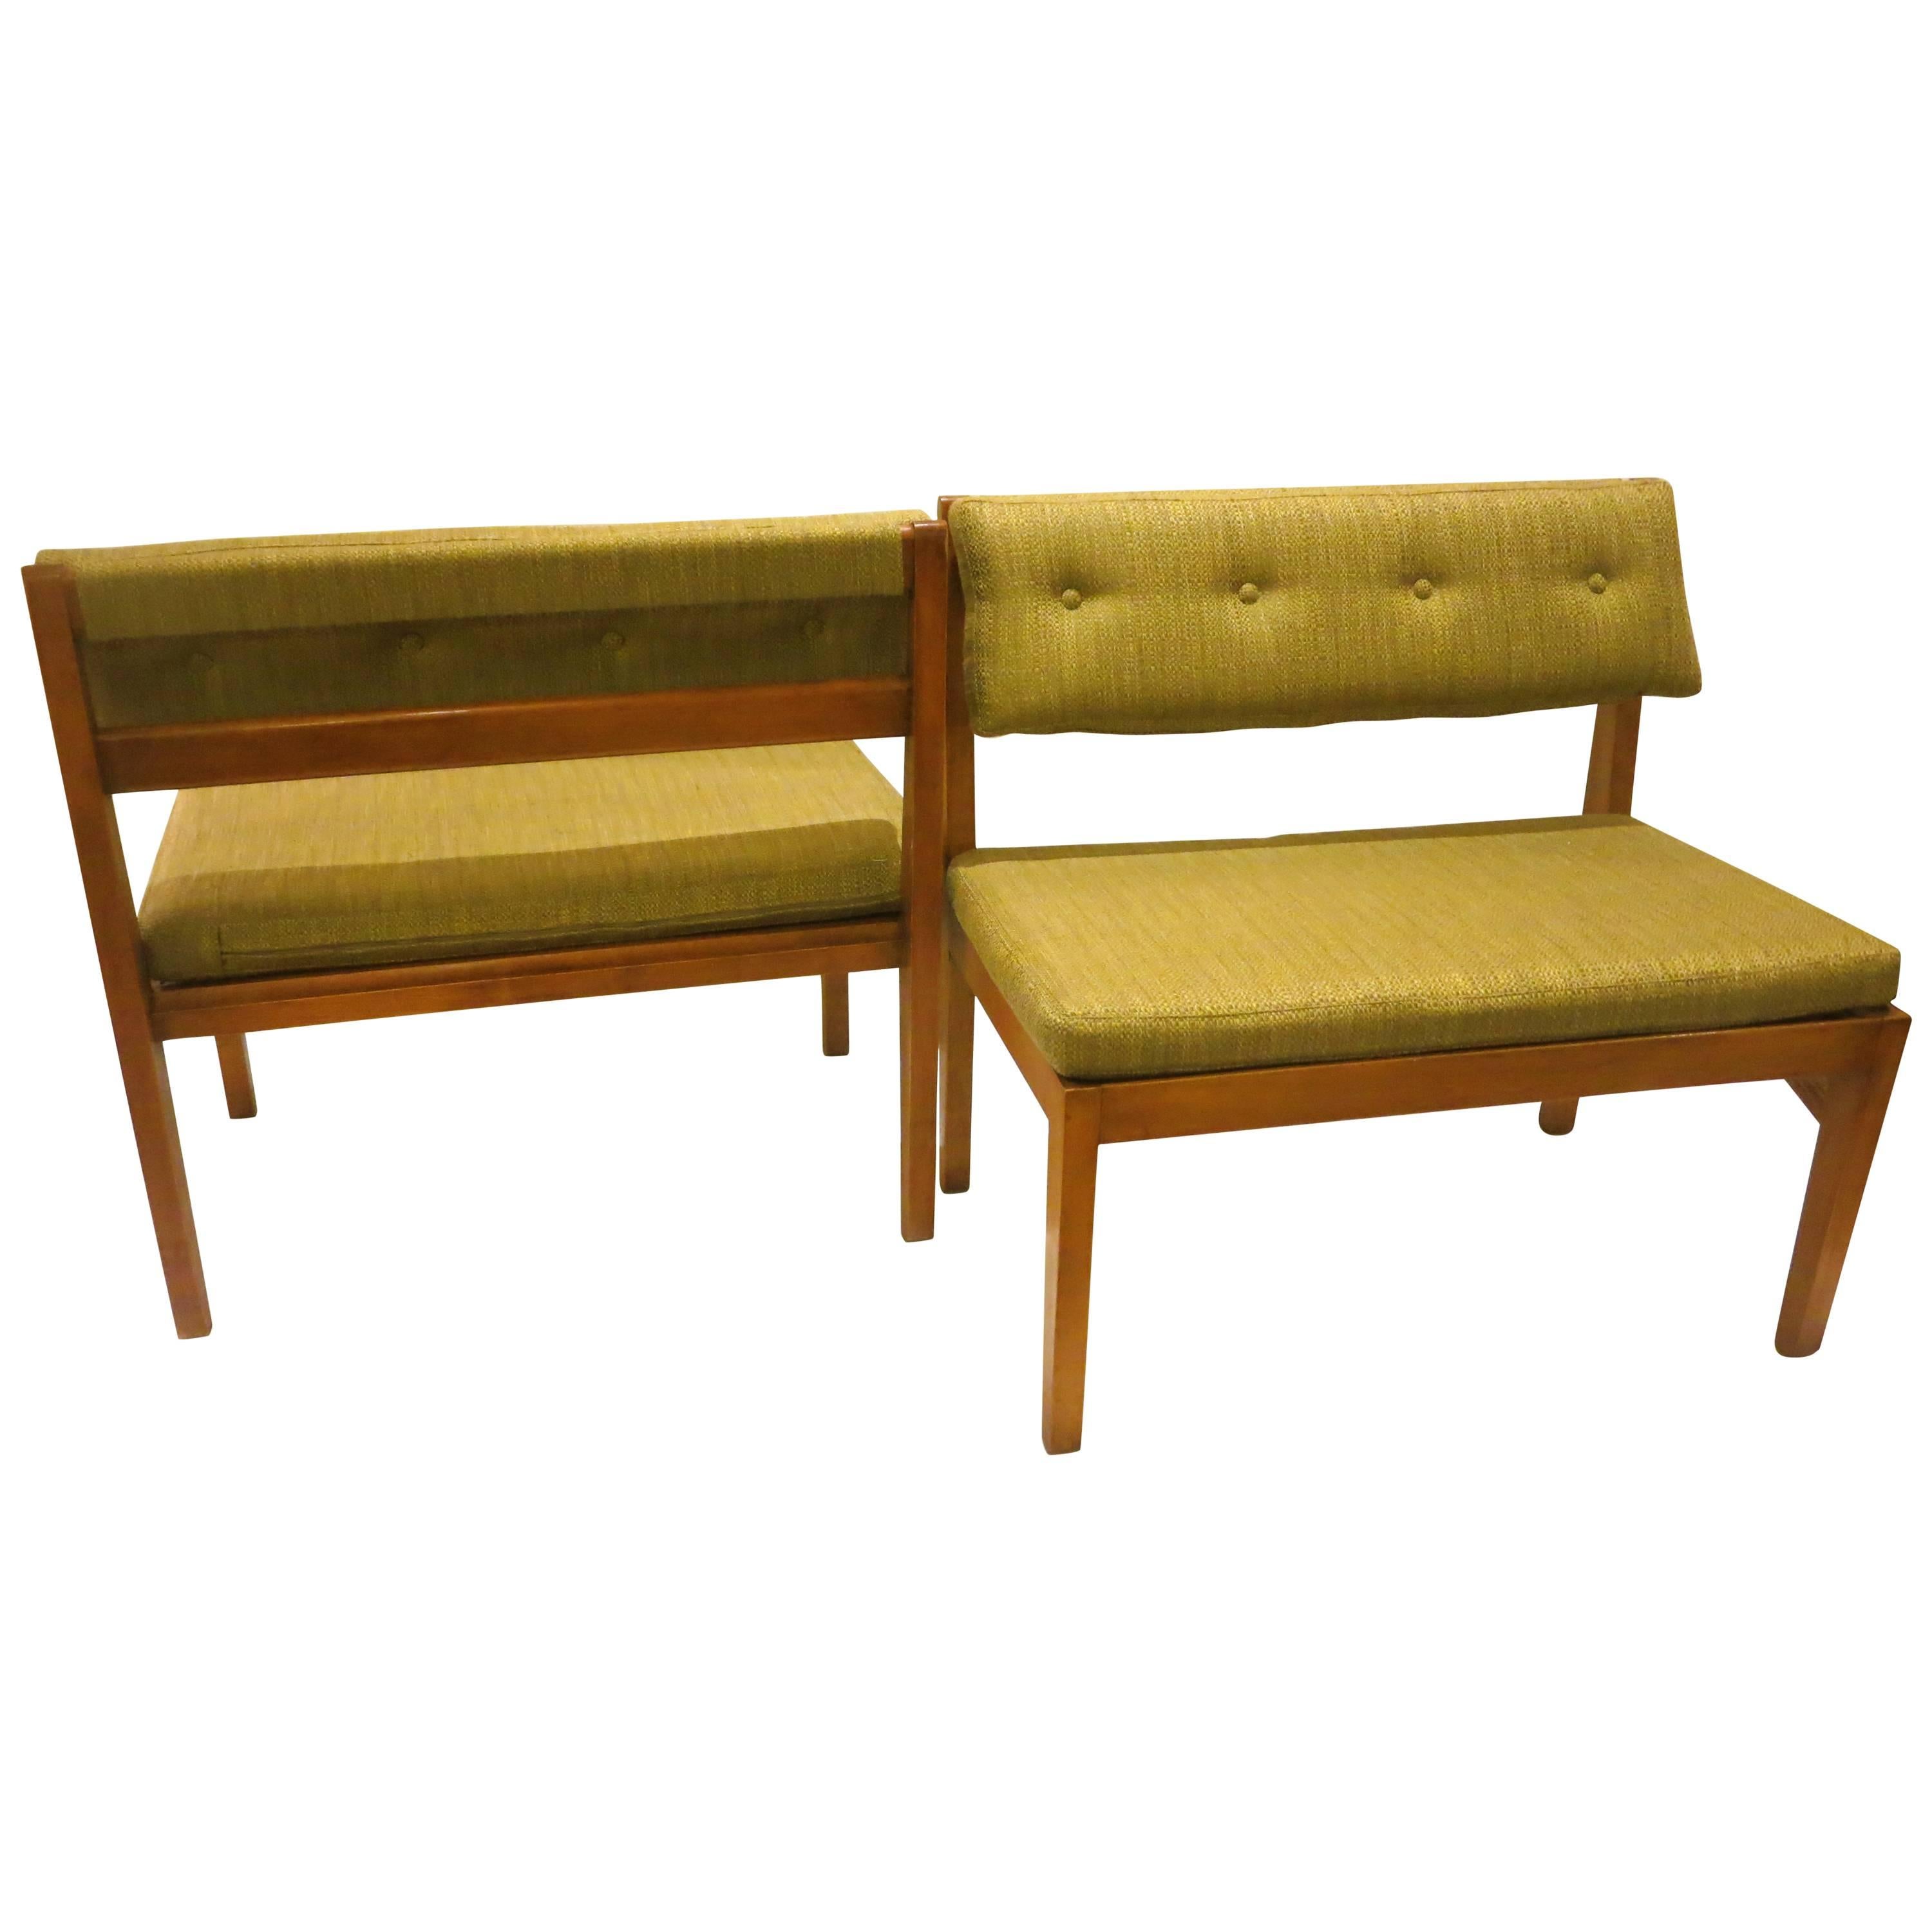 1950s American Mid-Century Modern Pair of Walnut Picnic Small Benches